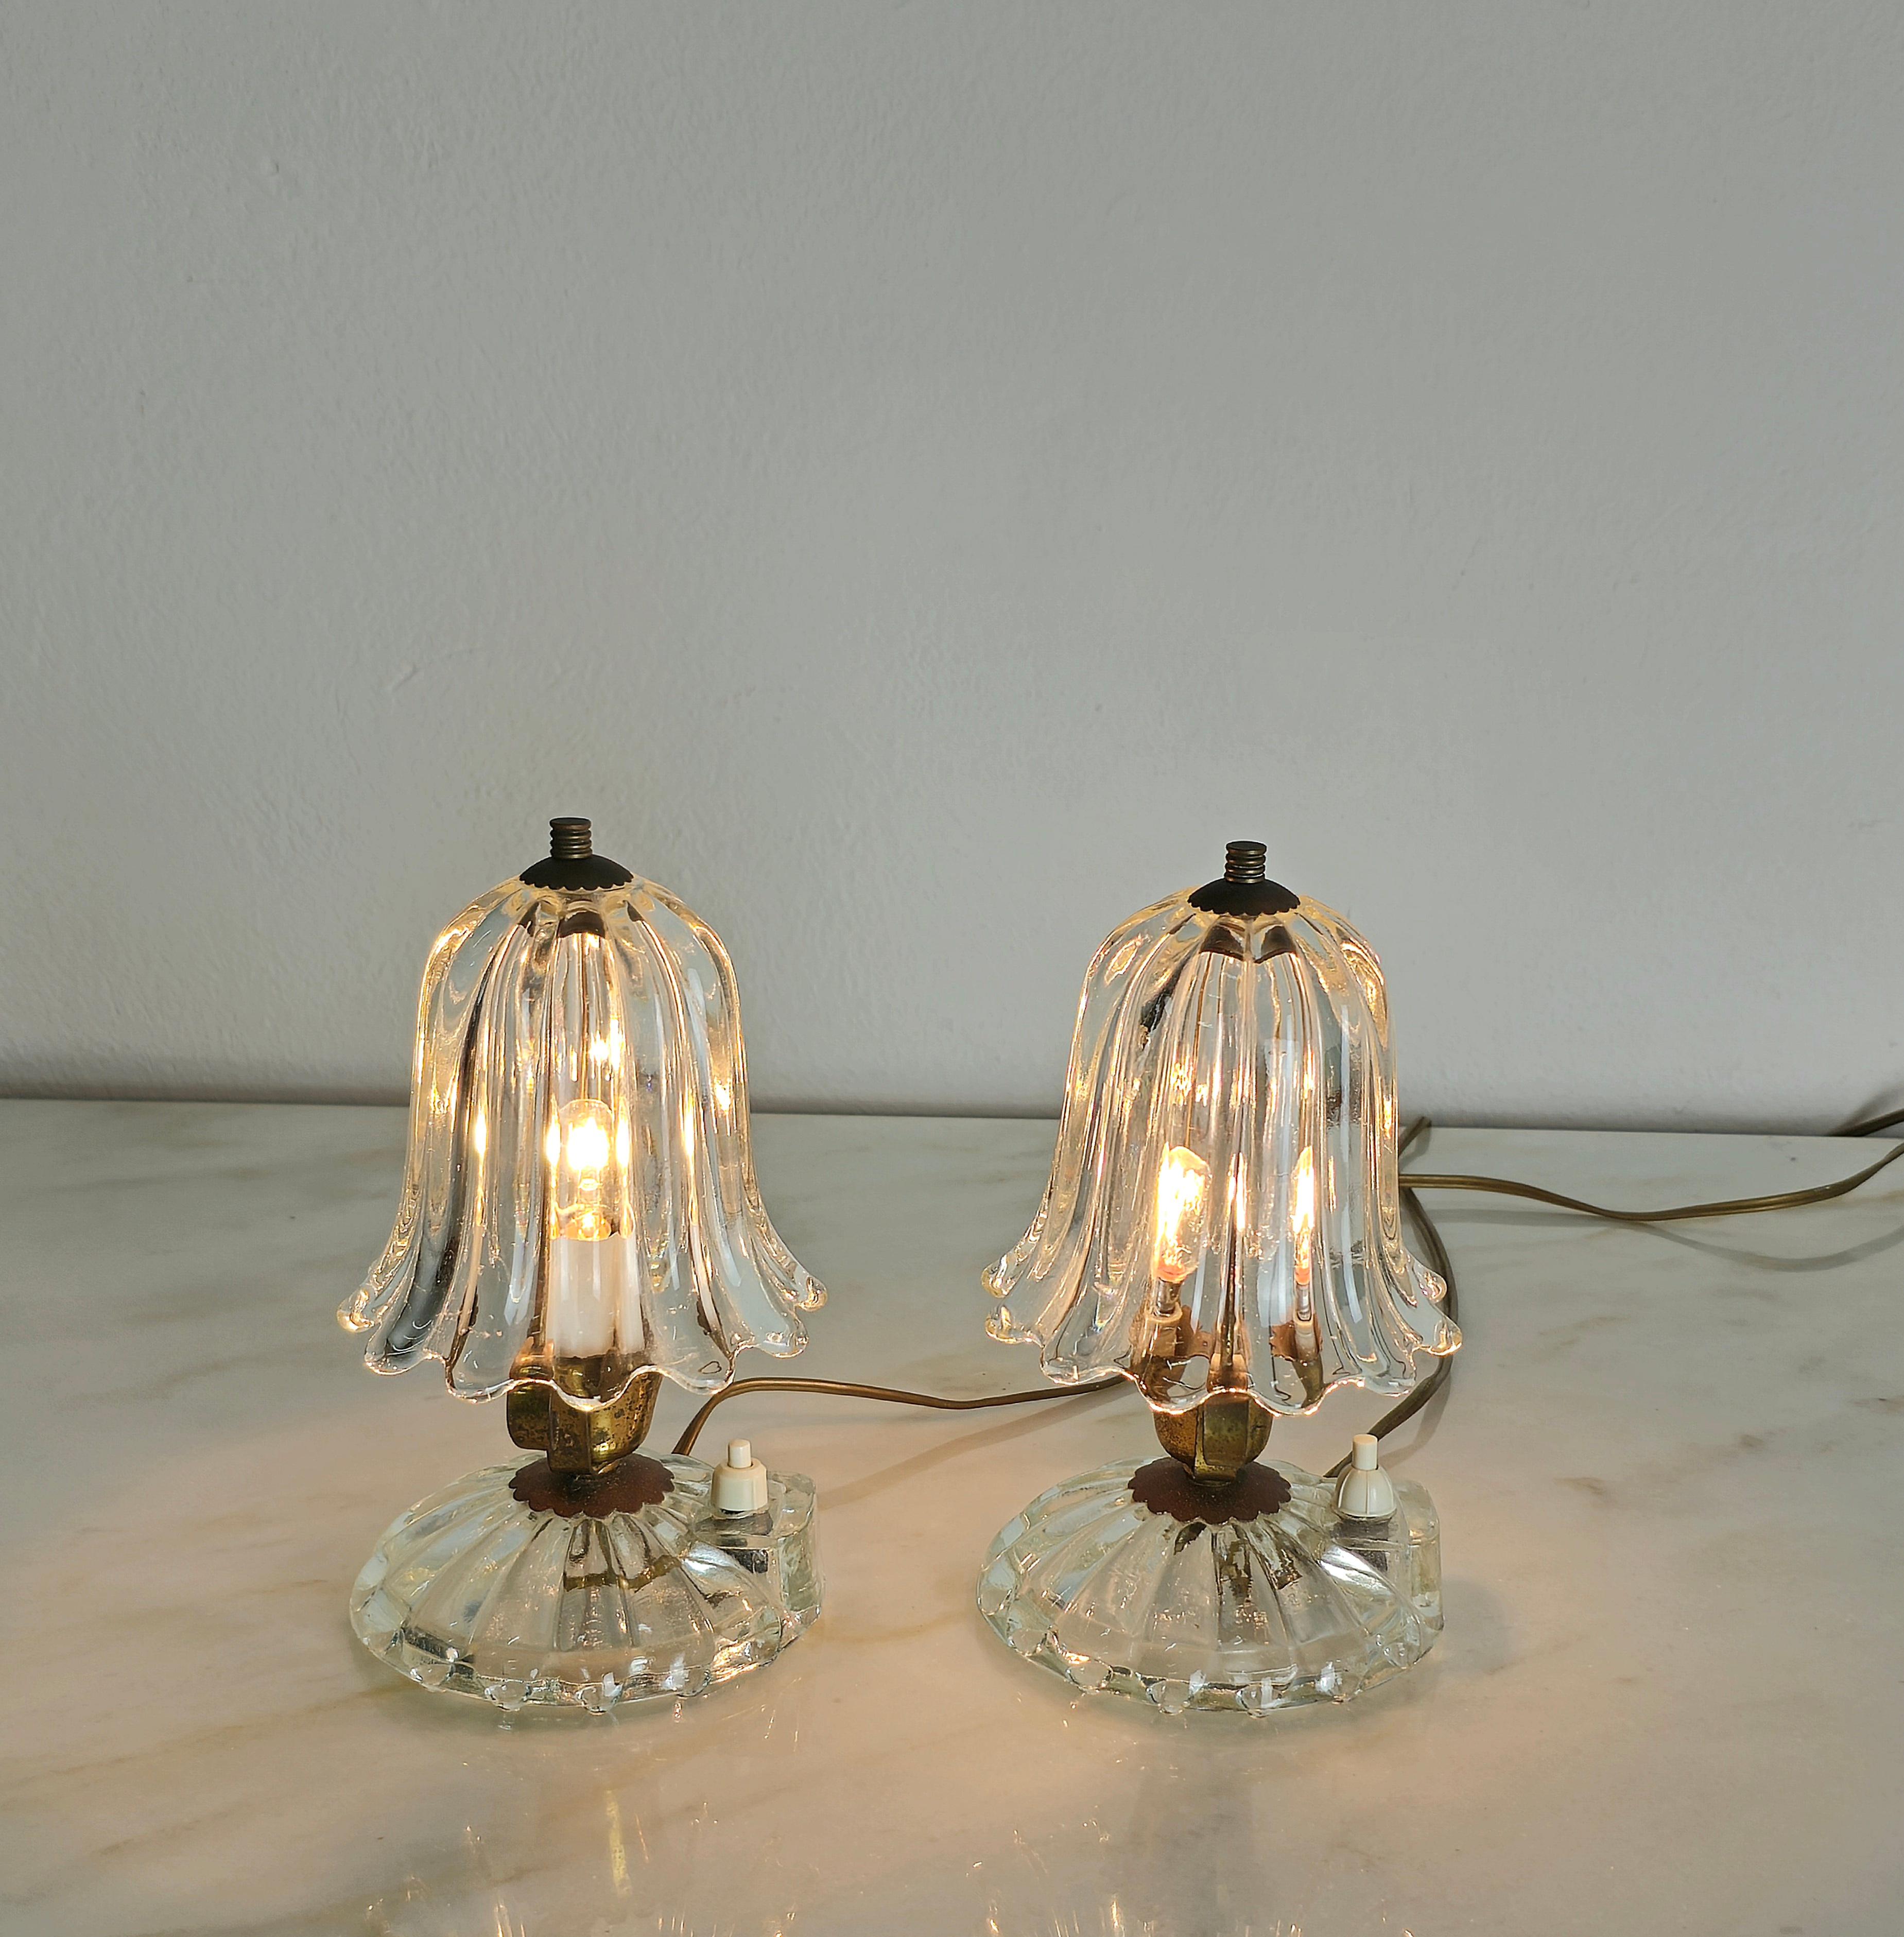 Pair of Table Lamps Murano Glass Brass Barovier&Toso Midcentury Italy 1940s 2